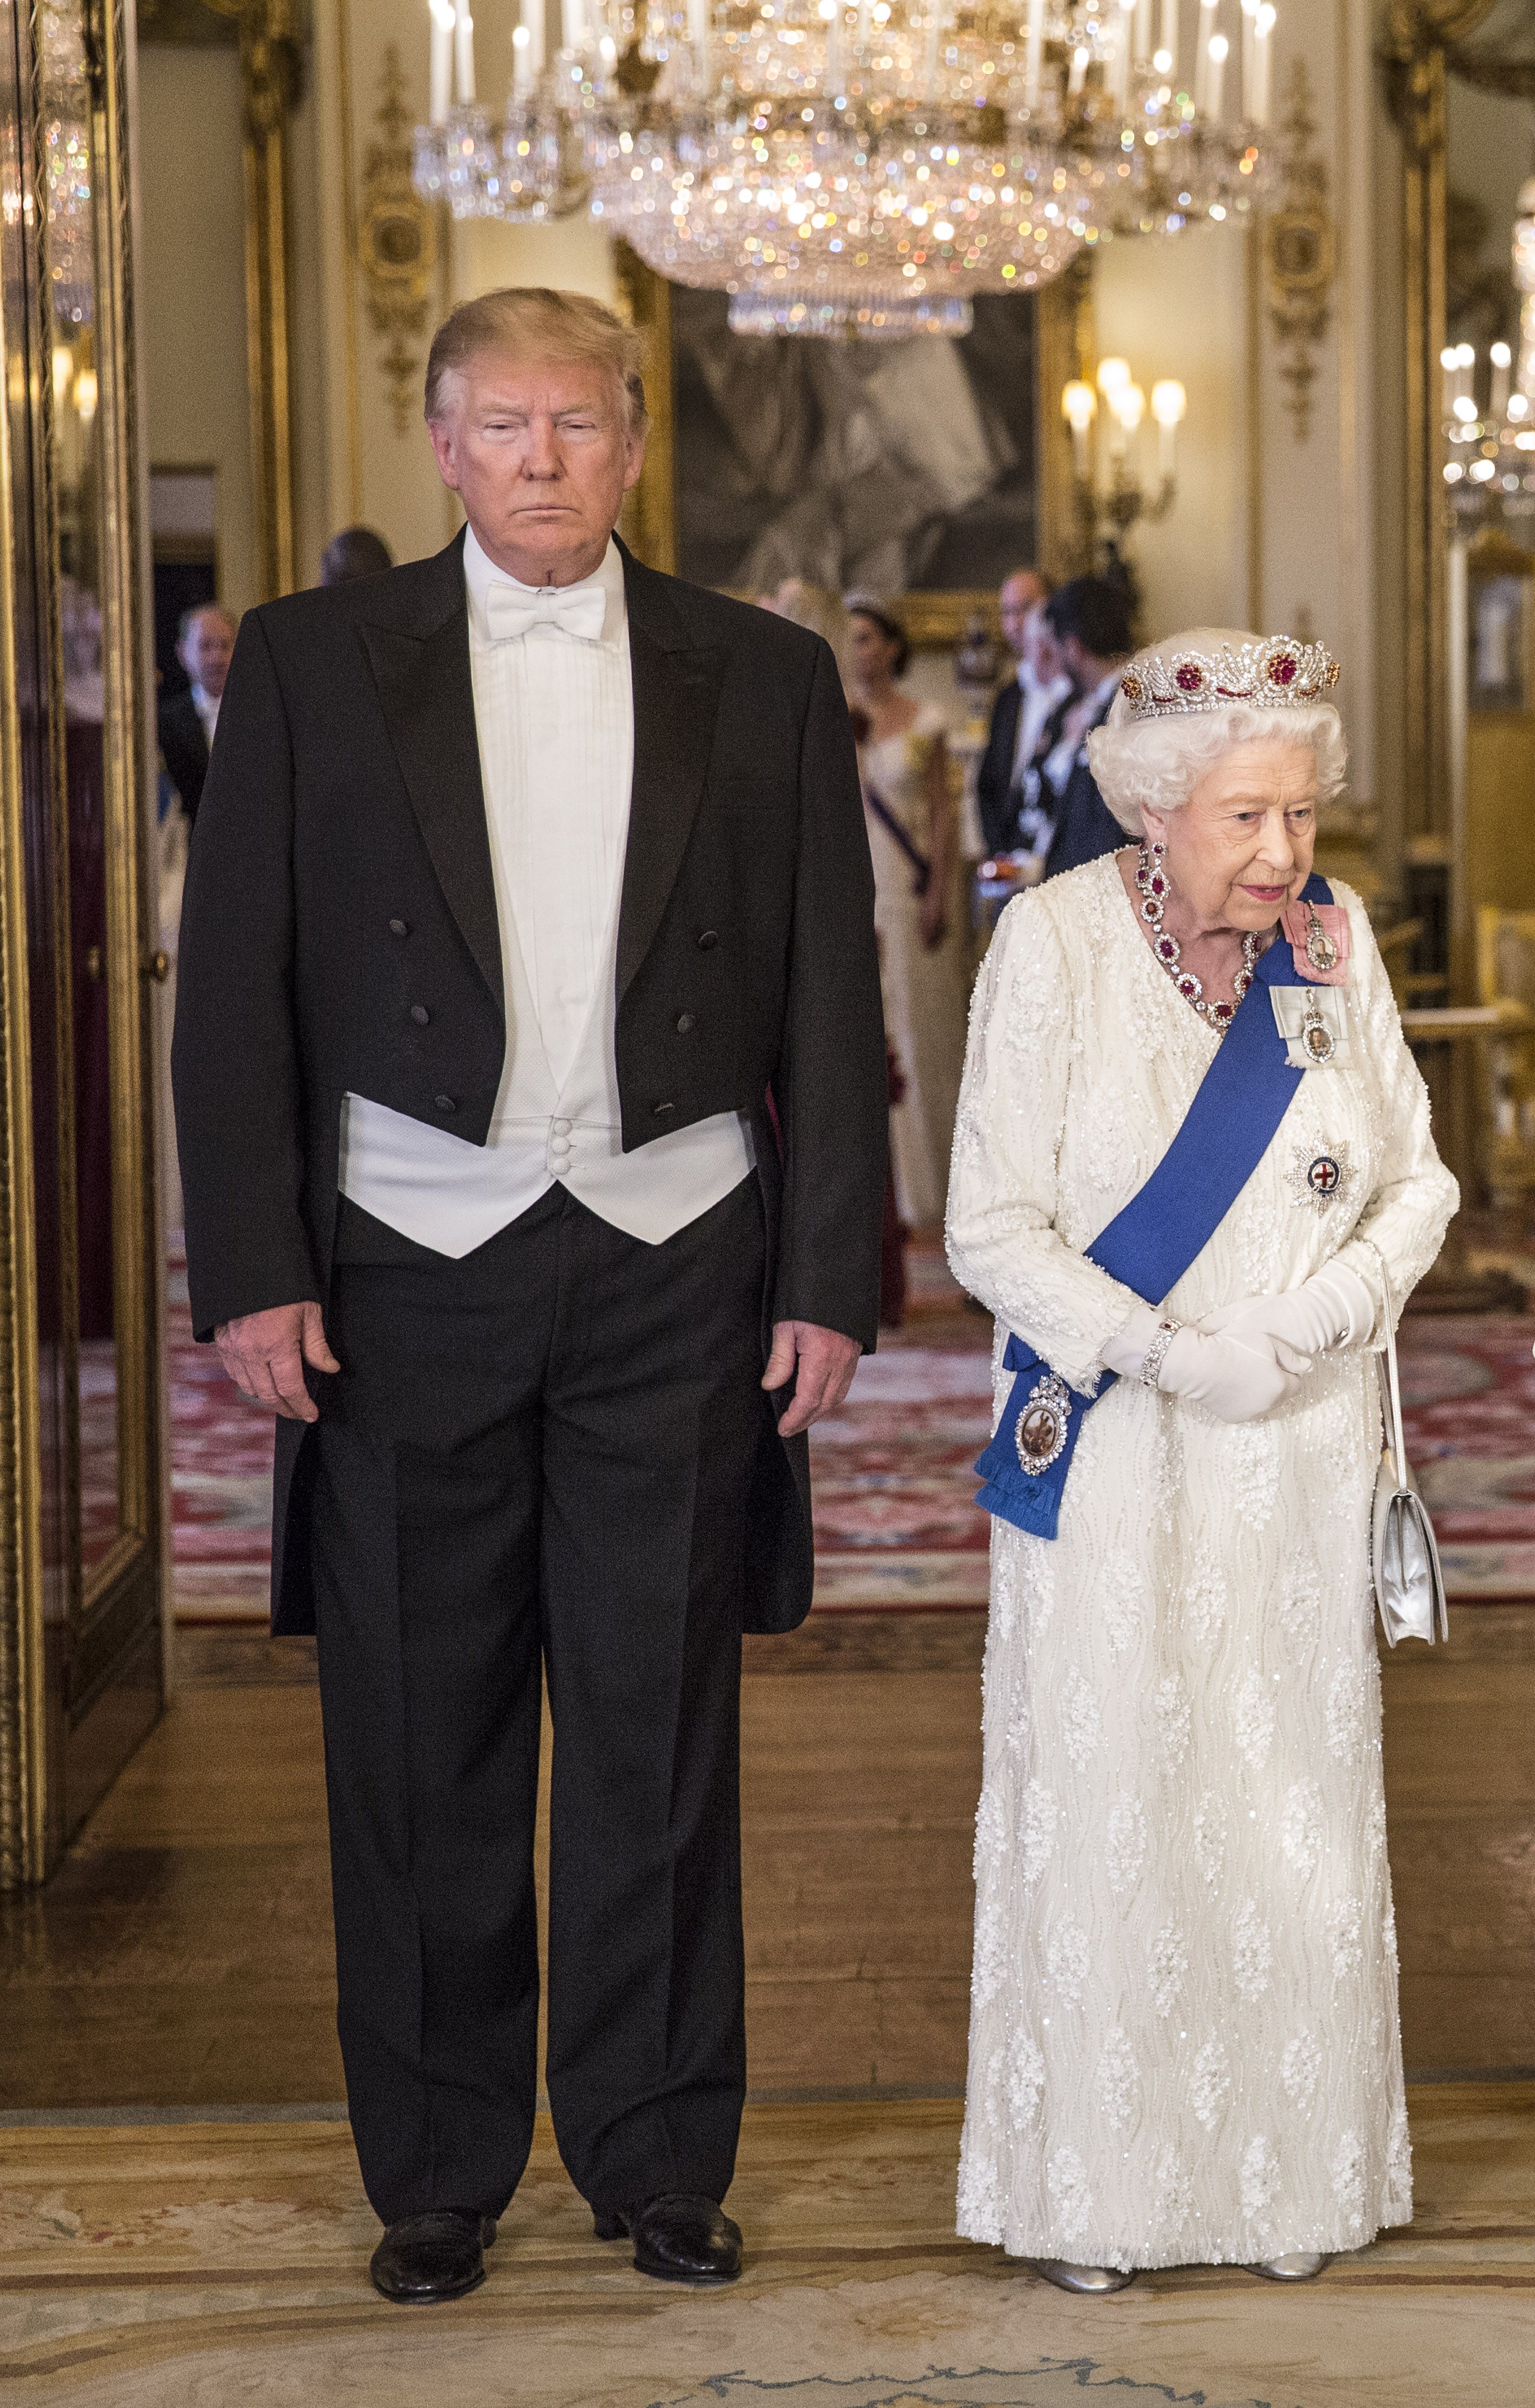 Why Donald Trump's UK State Visit Tuxedo White Tie Looks So Wrong